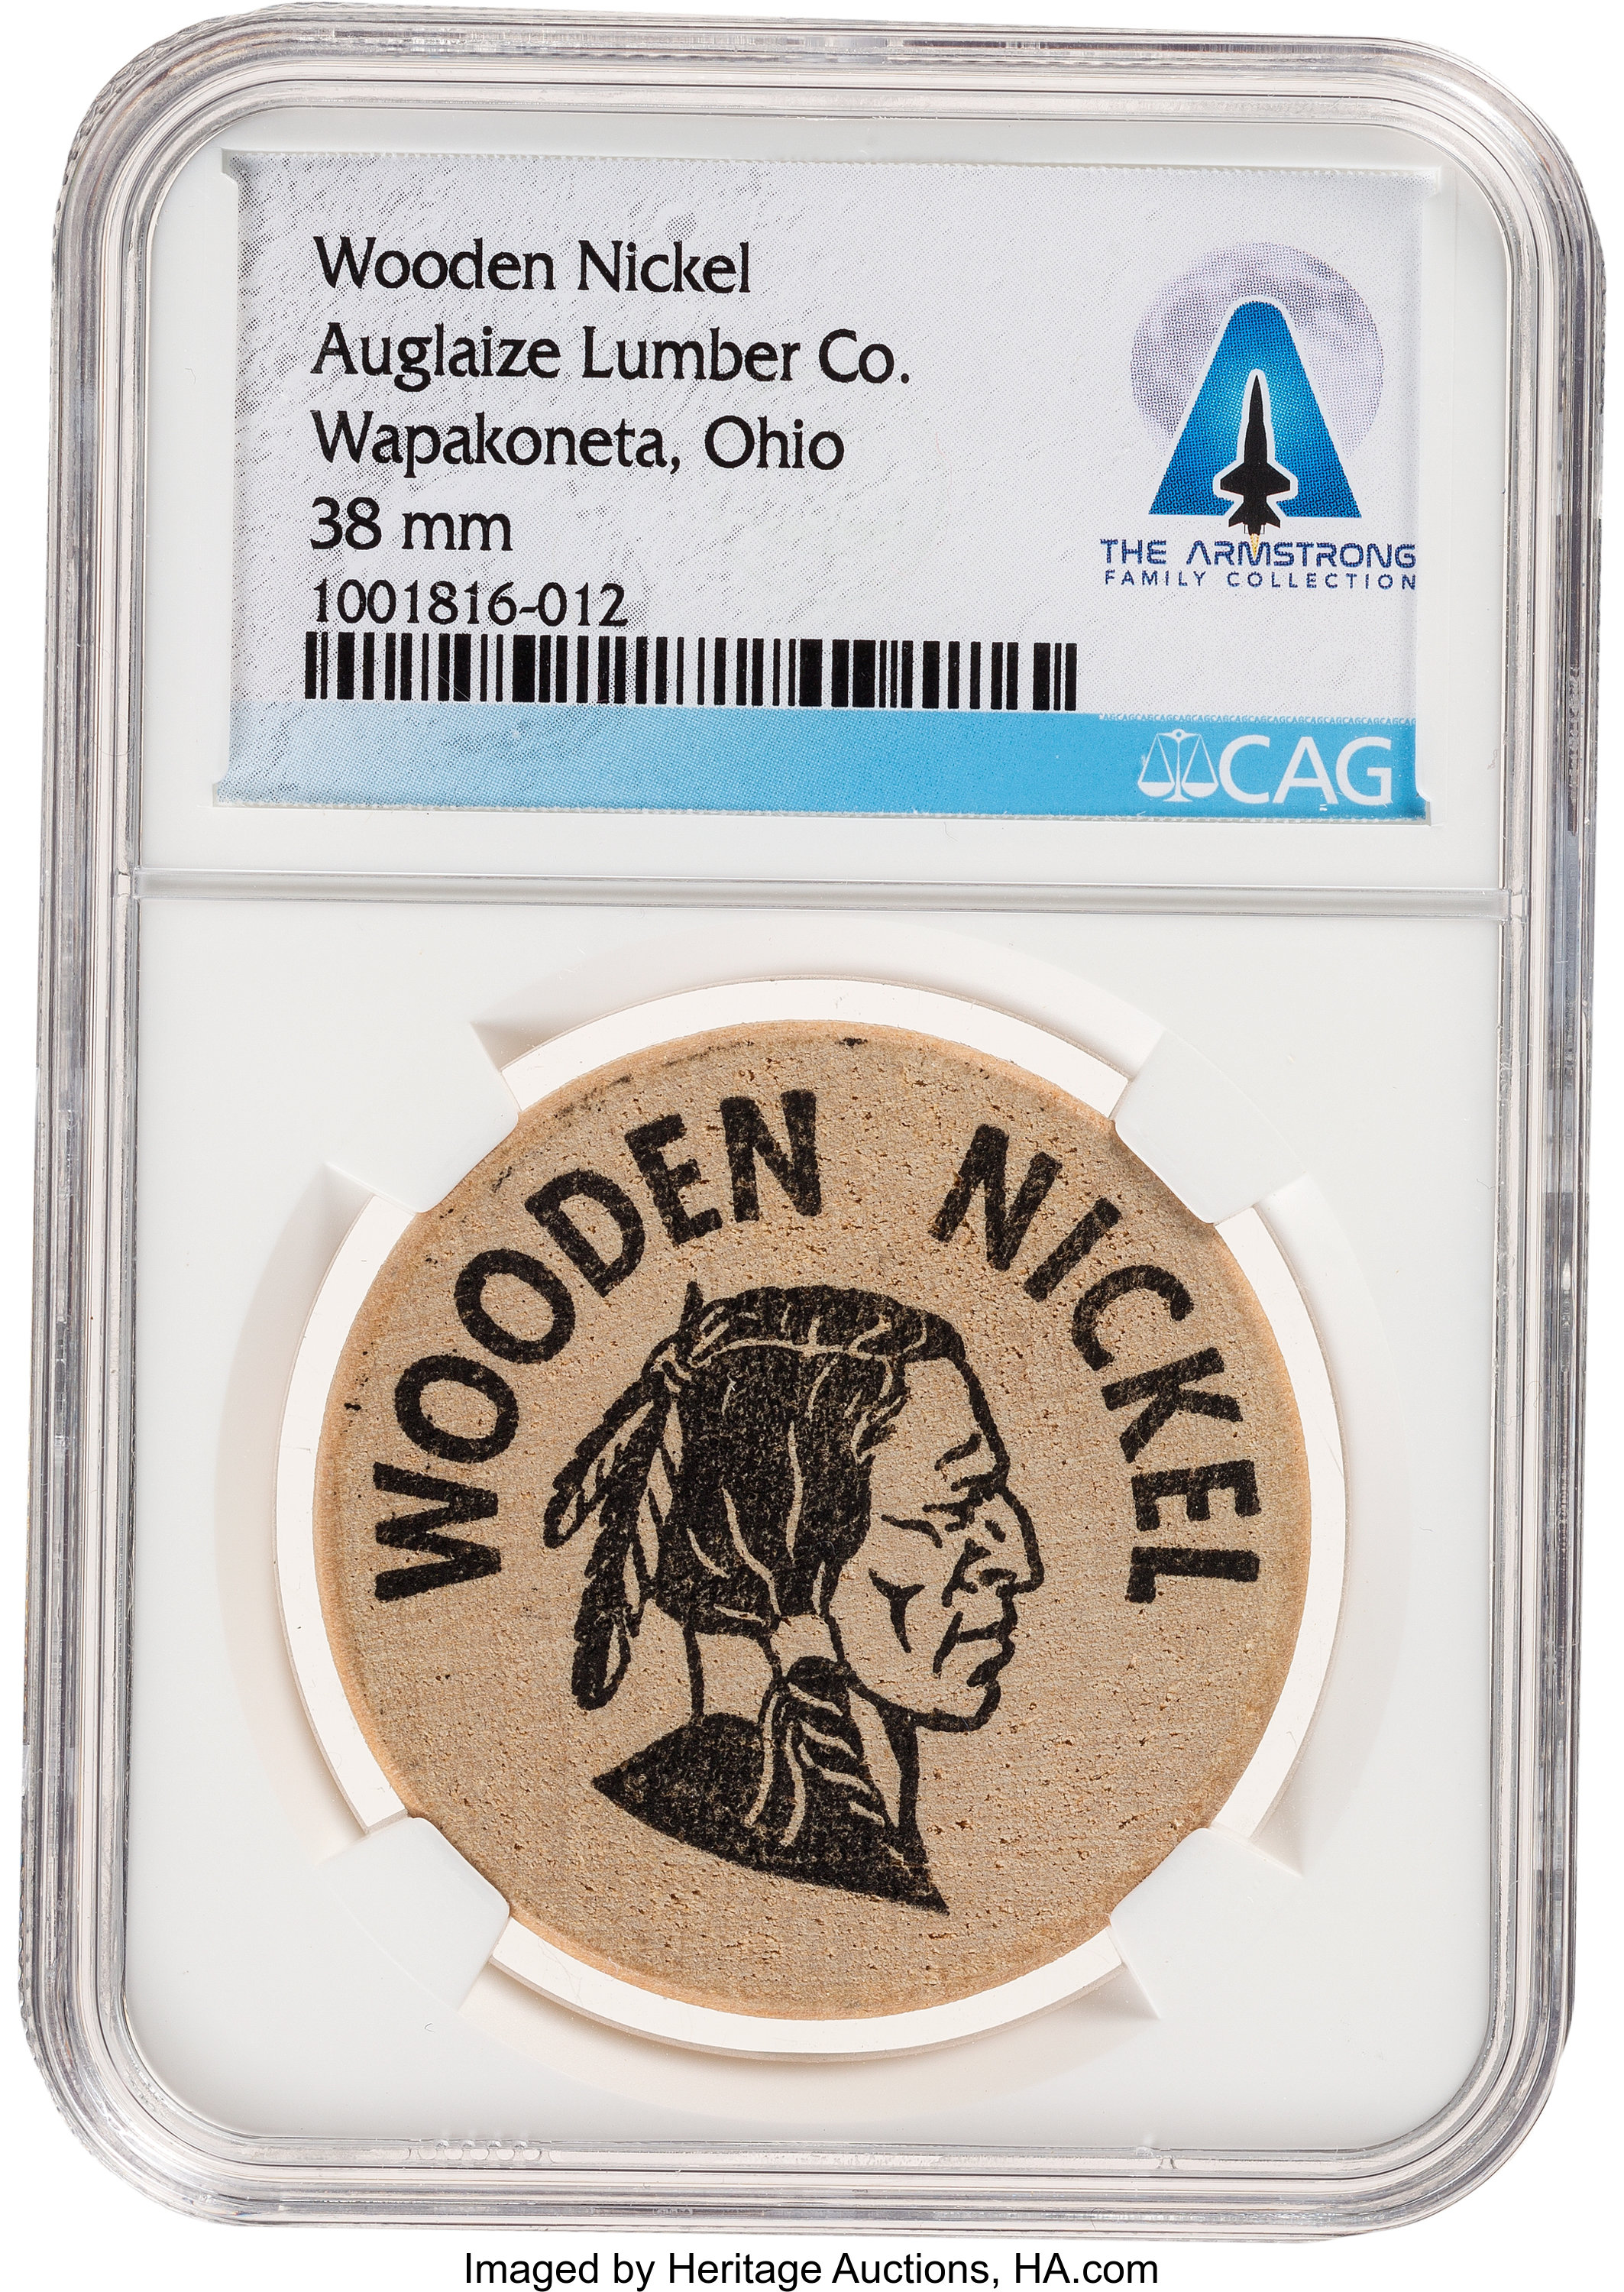 wapakoneta auglaize lumber co wooden nickel directly from the lot 50868 heritage auctions 2